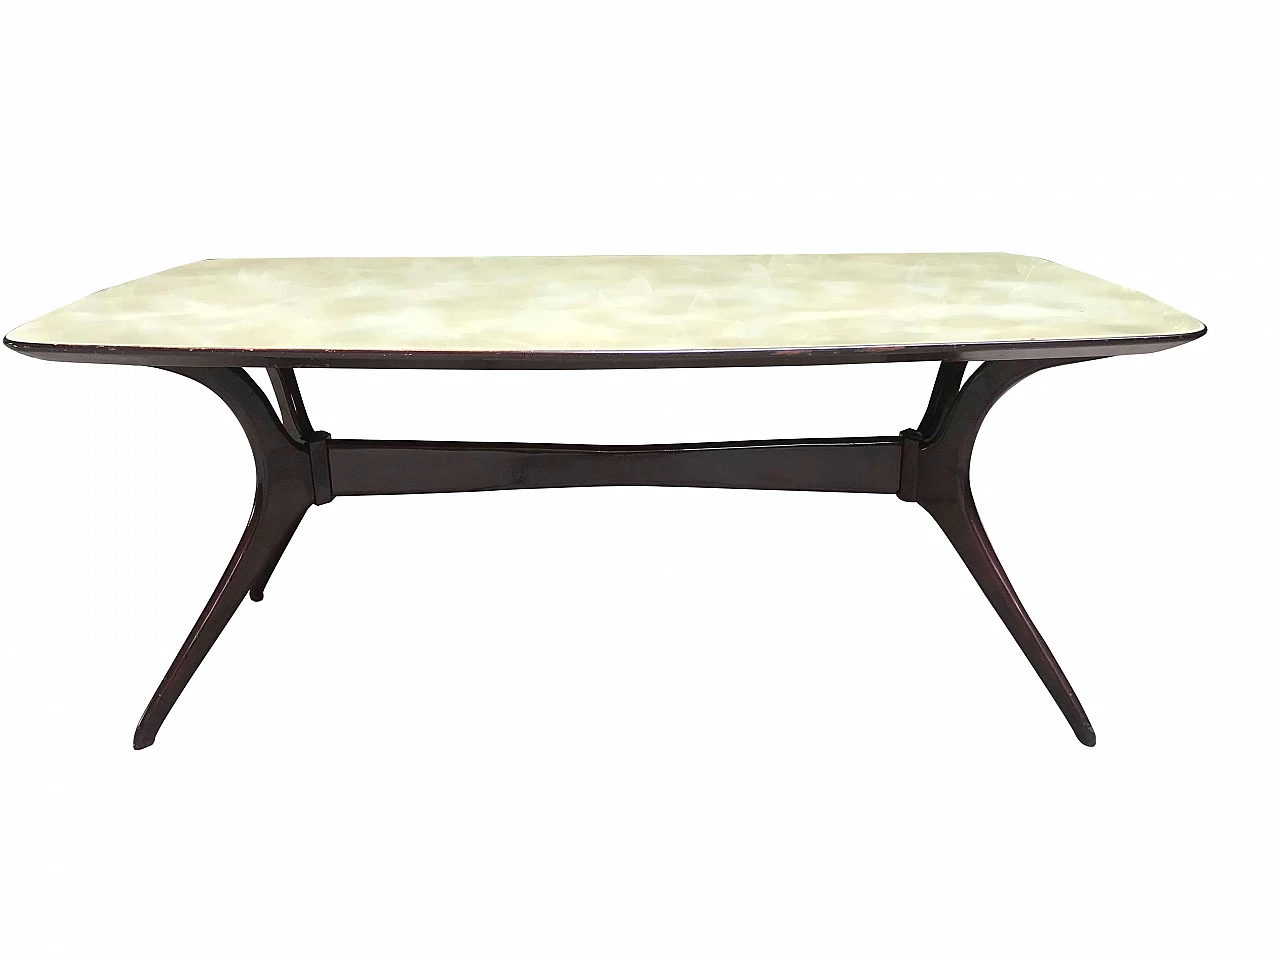 Beech table with glass top, 1950s 1082688